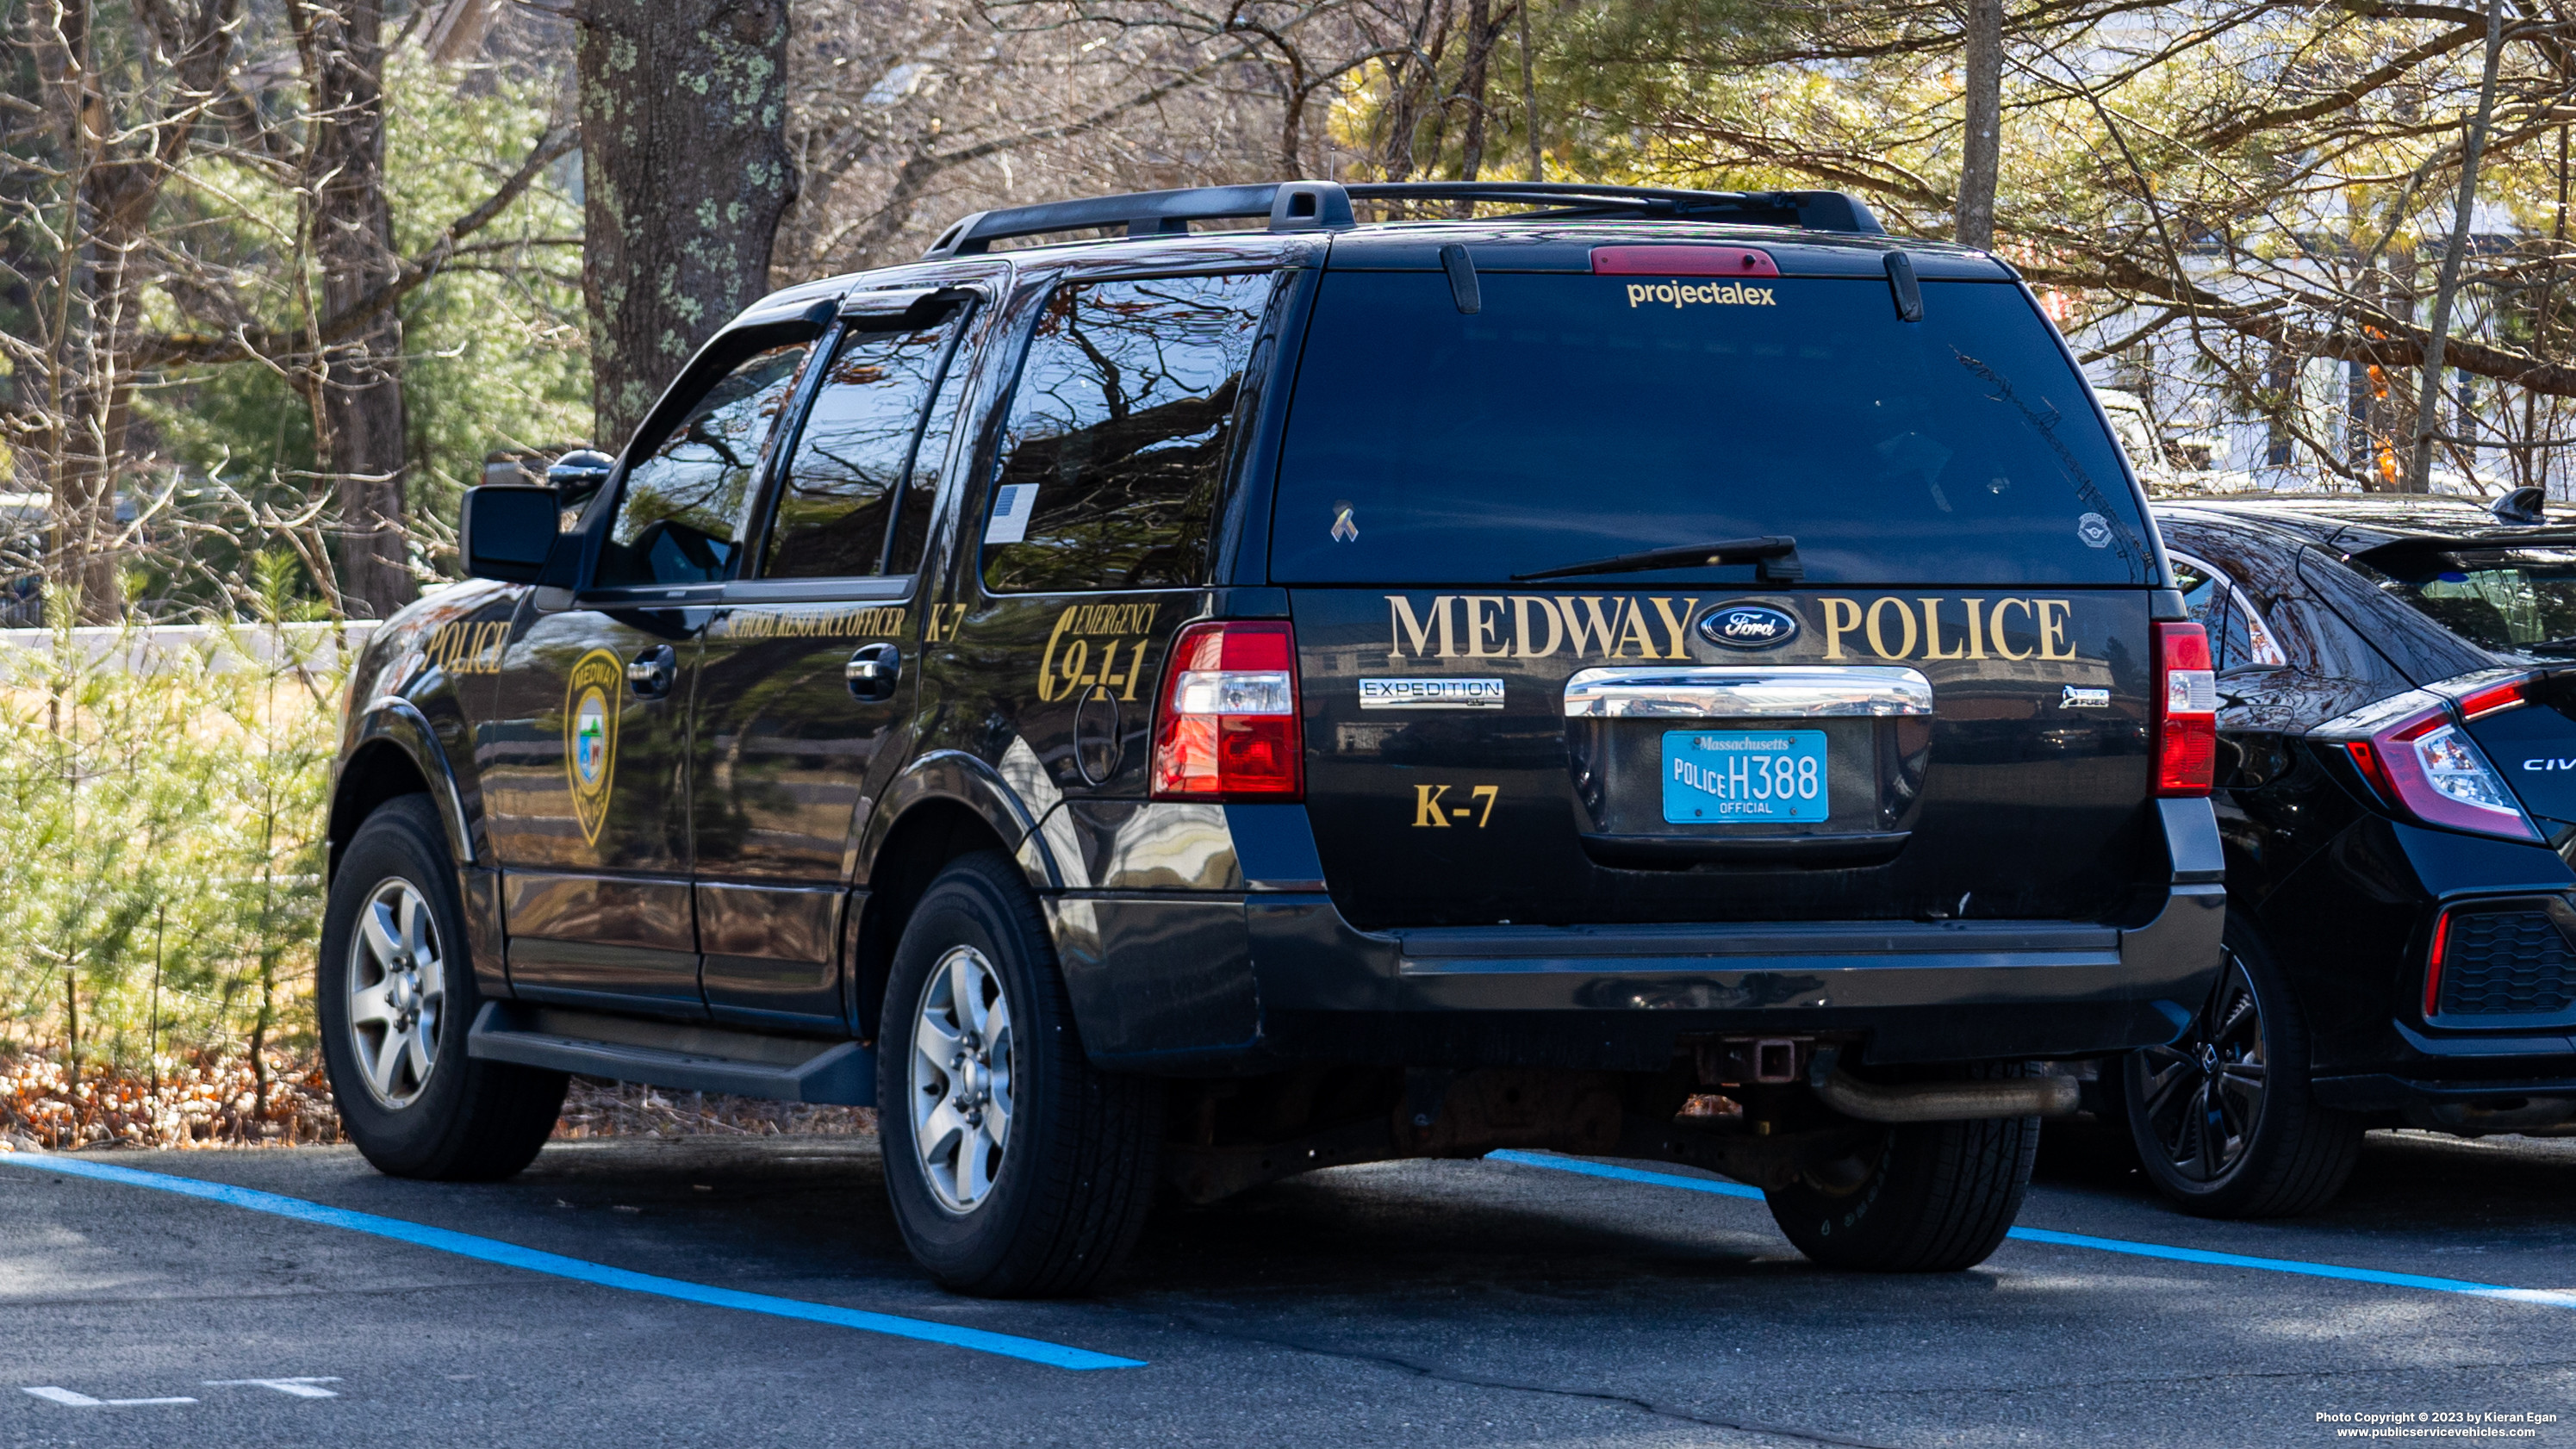 A photo  of Medway Police
            Cruiser K-7, a 2010 Ford Expedition             taken by Kieran Egan